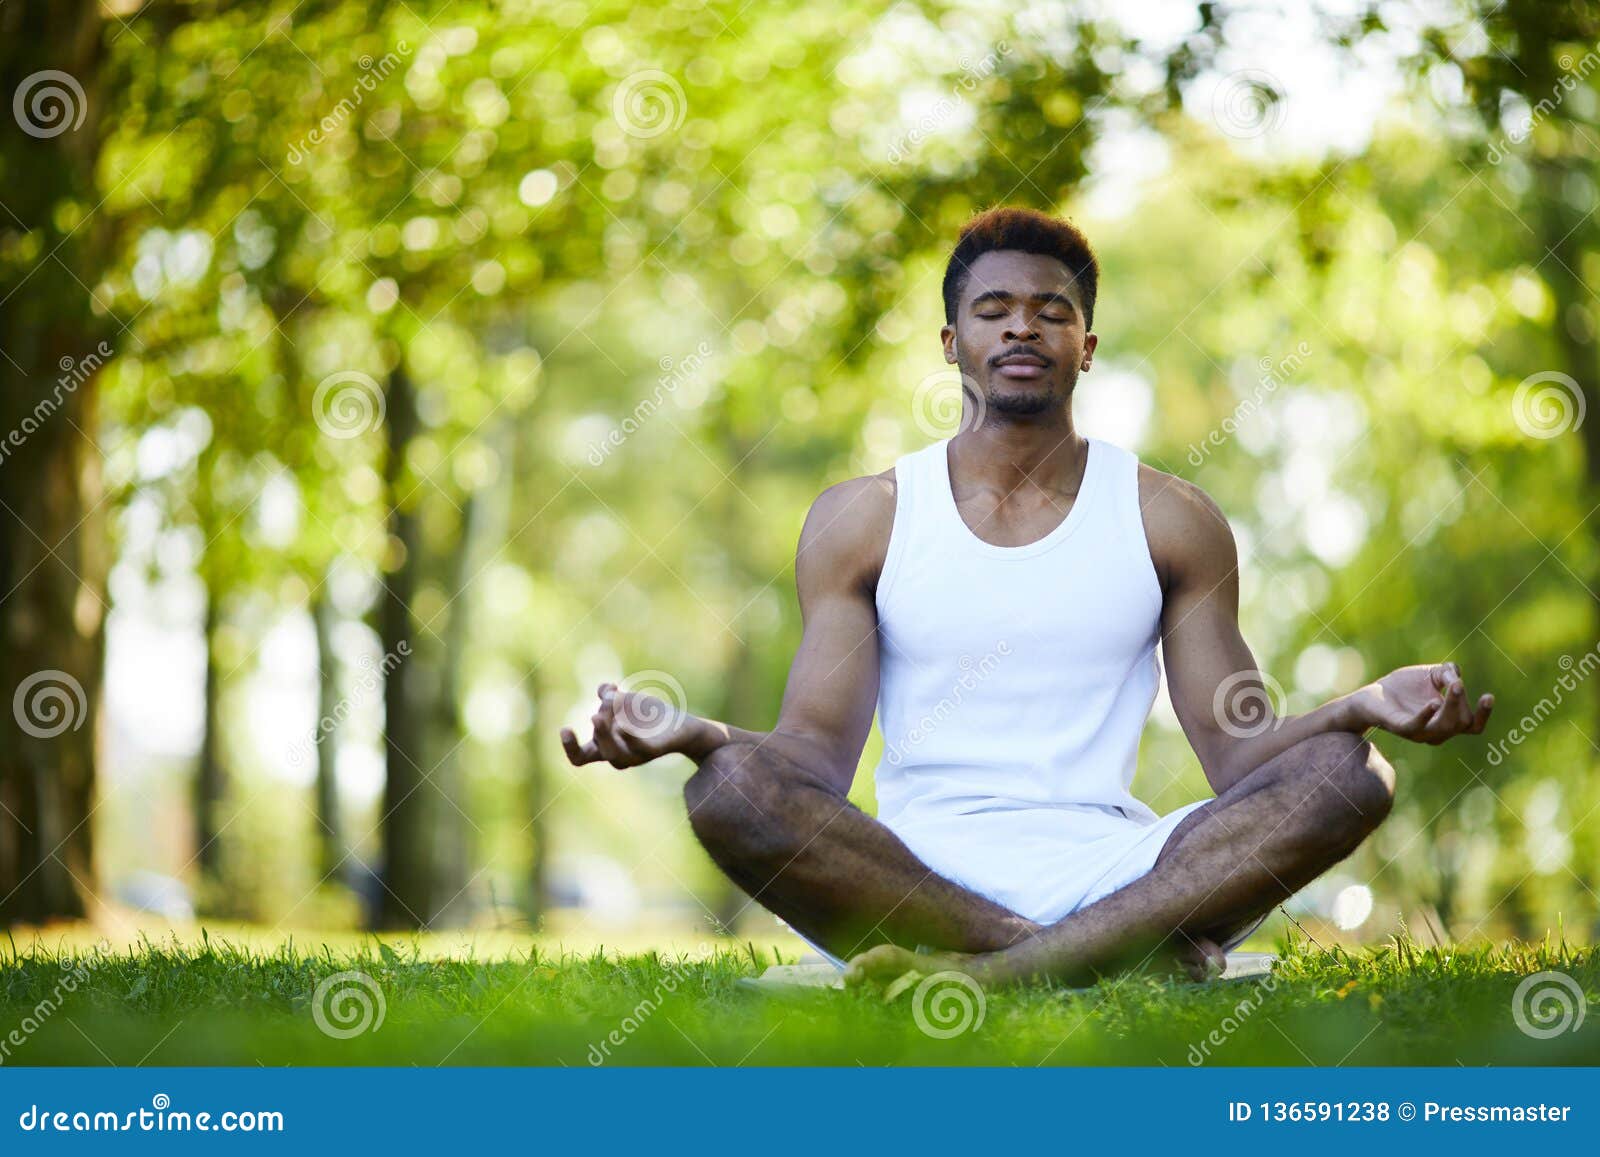 Relaxed Black Man Meditating Alone in Park Stock Photo - Image of adult ...